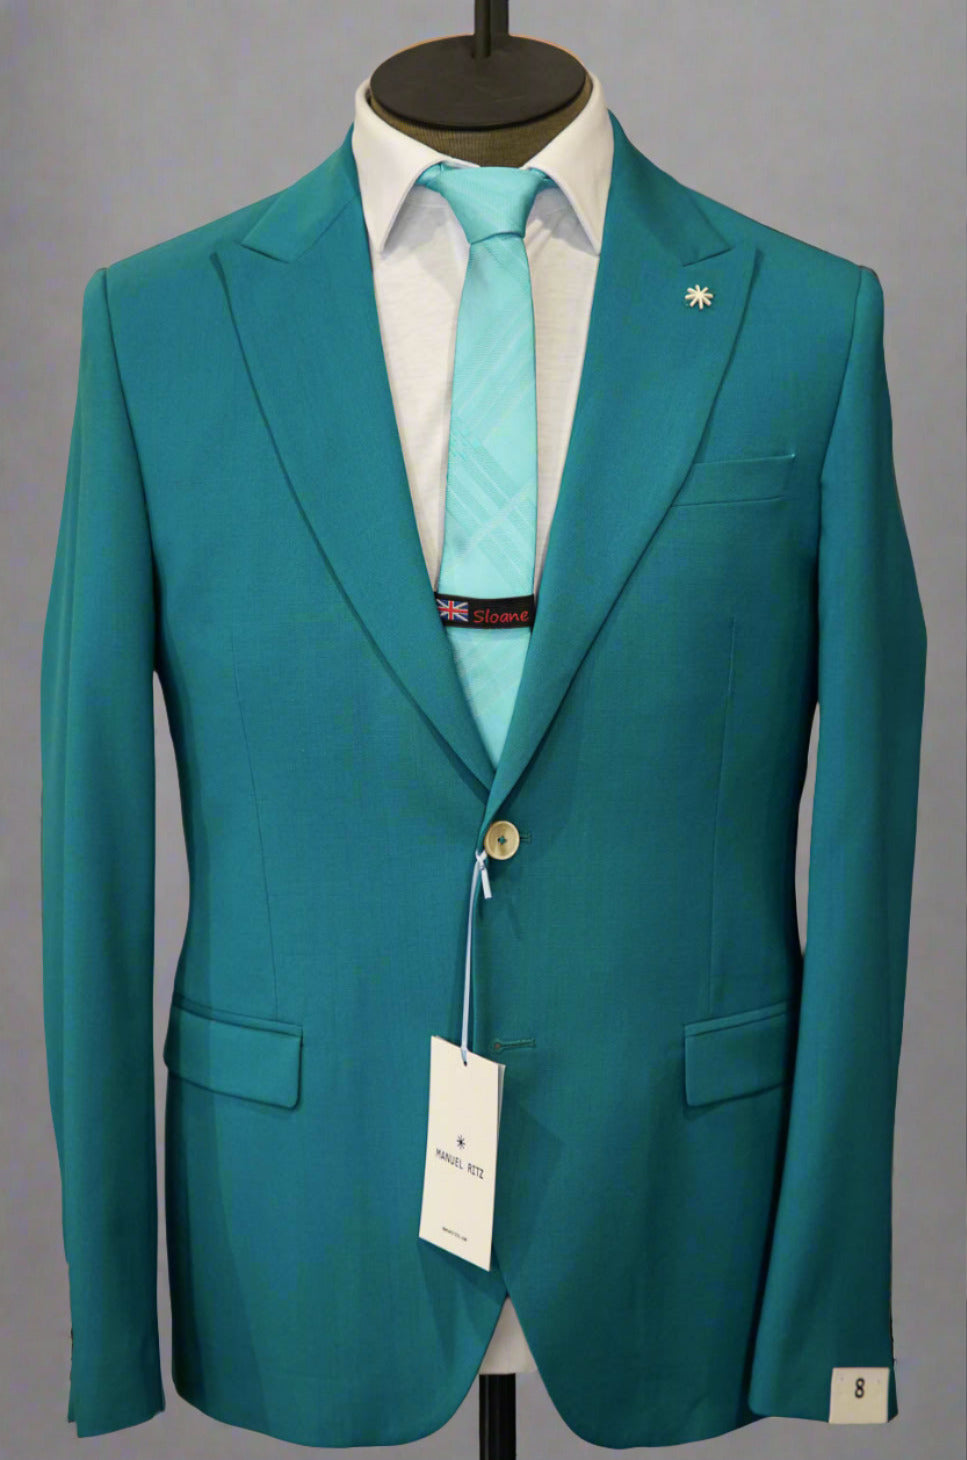 Manuel Ritz teal suit with a tonal teal paisley tie in Ultimo Euromoda store.